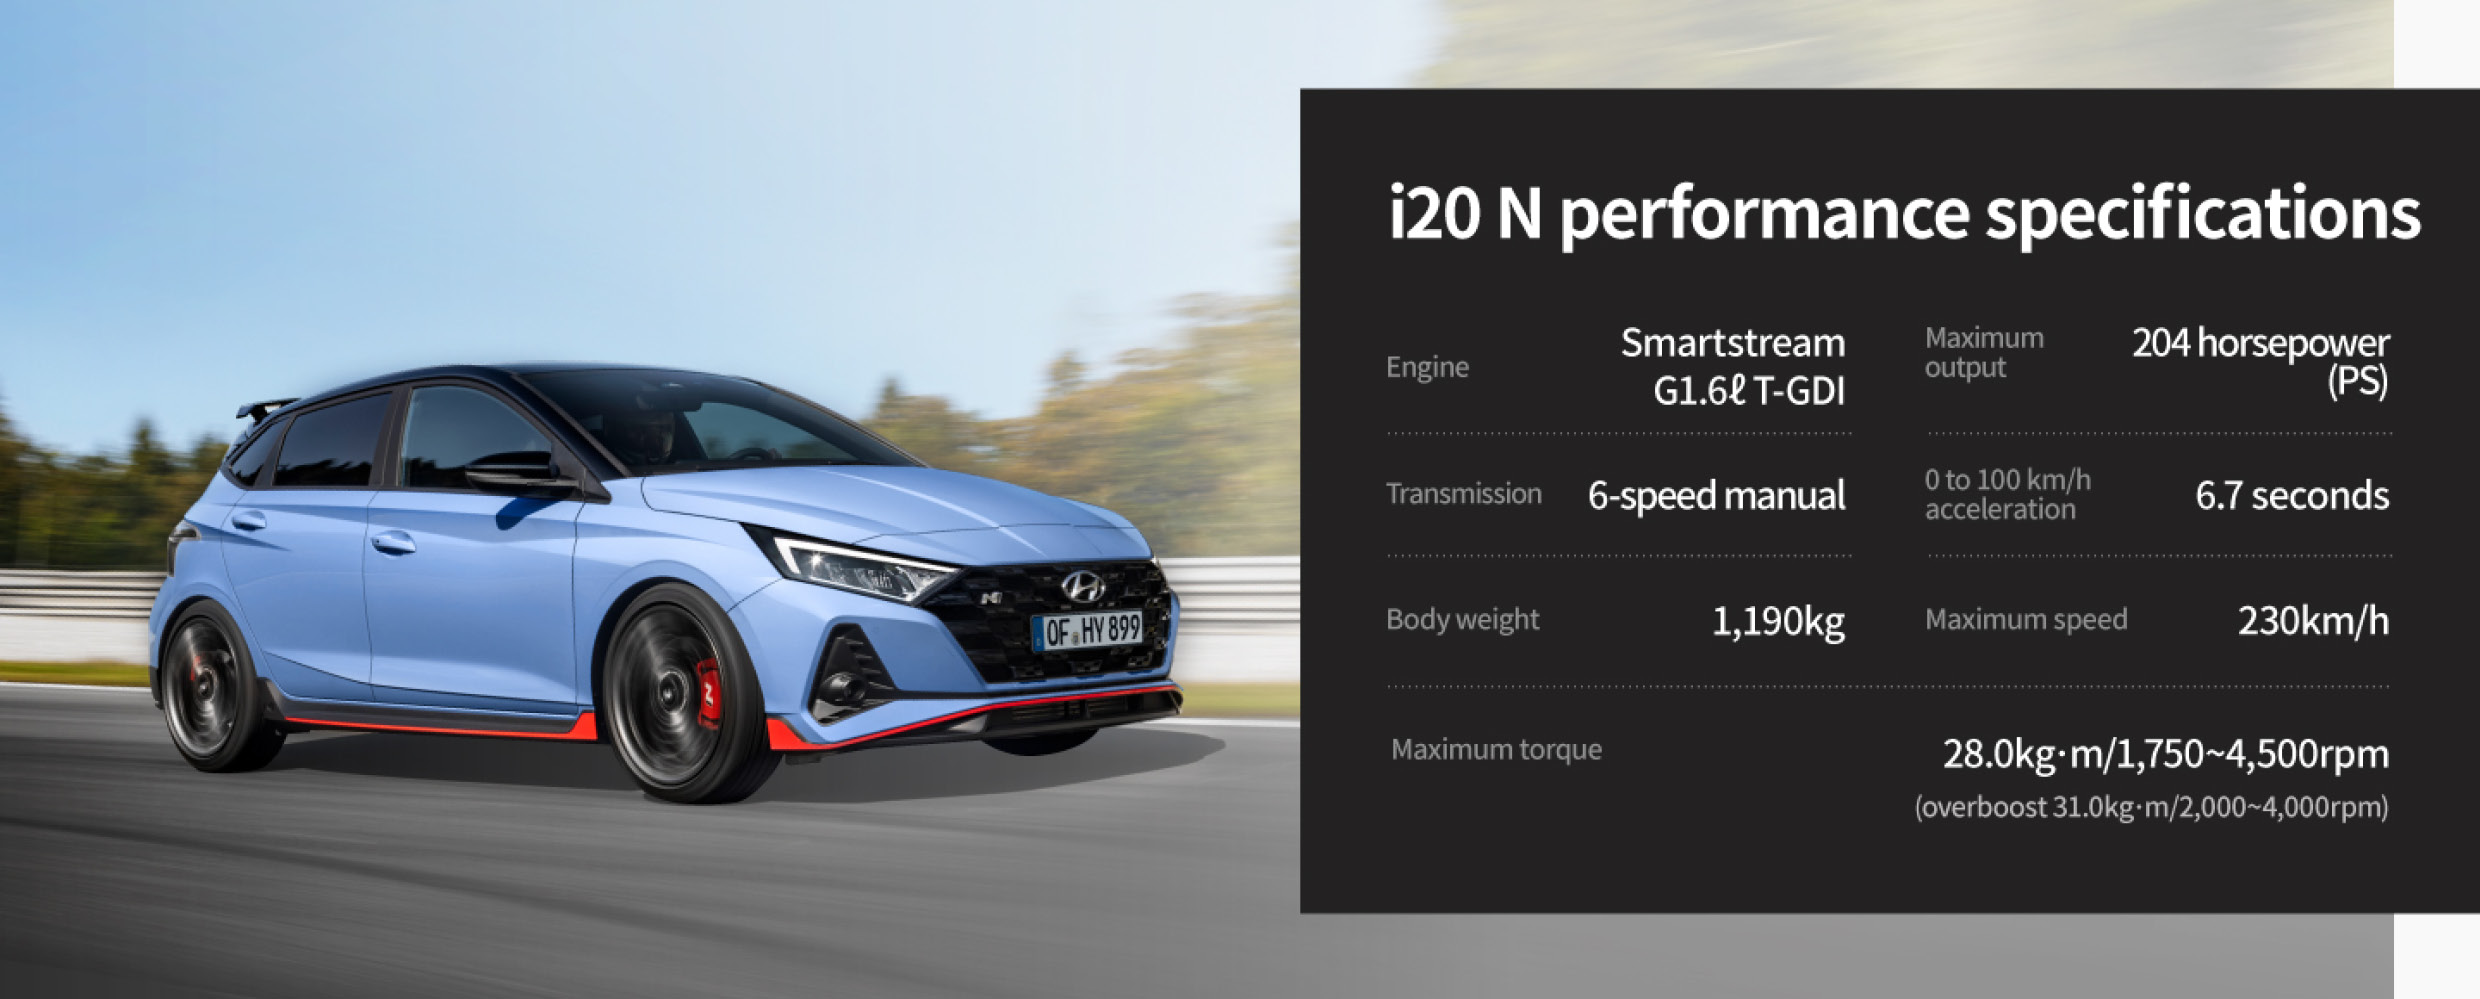 i20 N performance specification